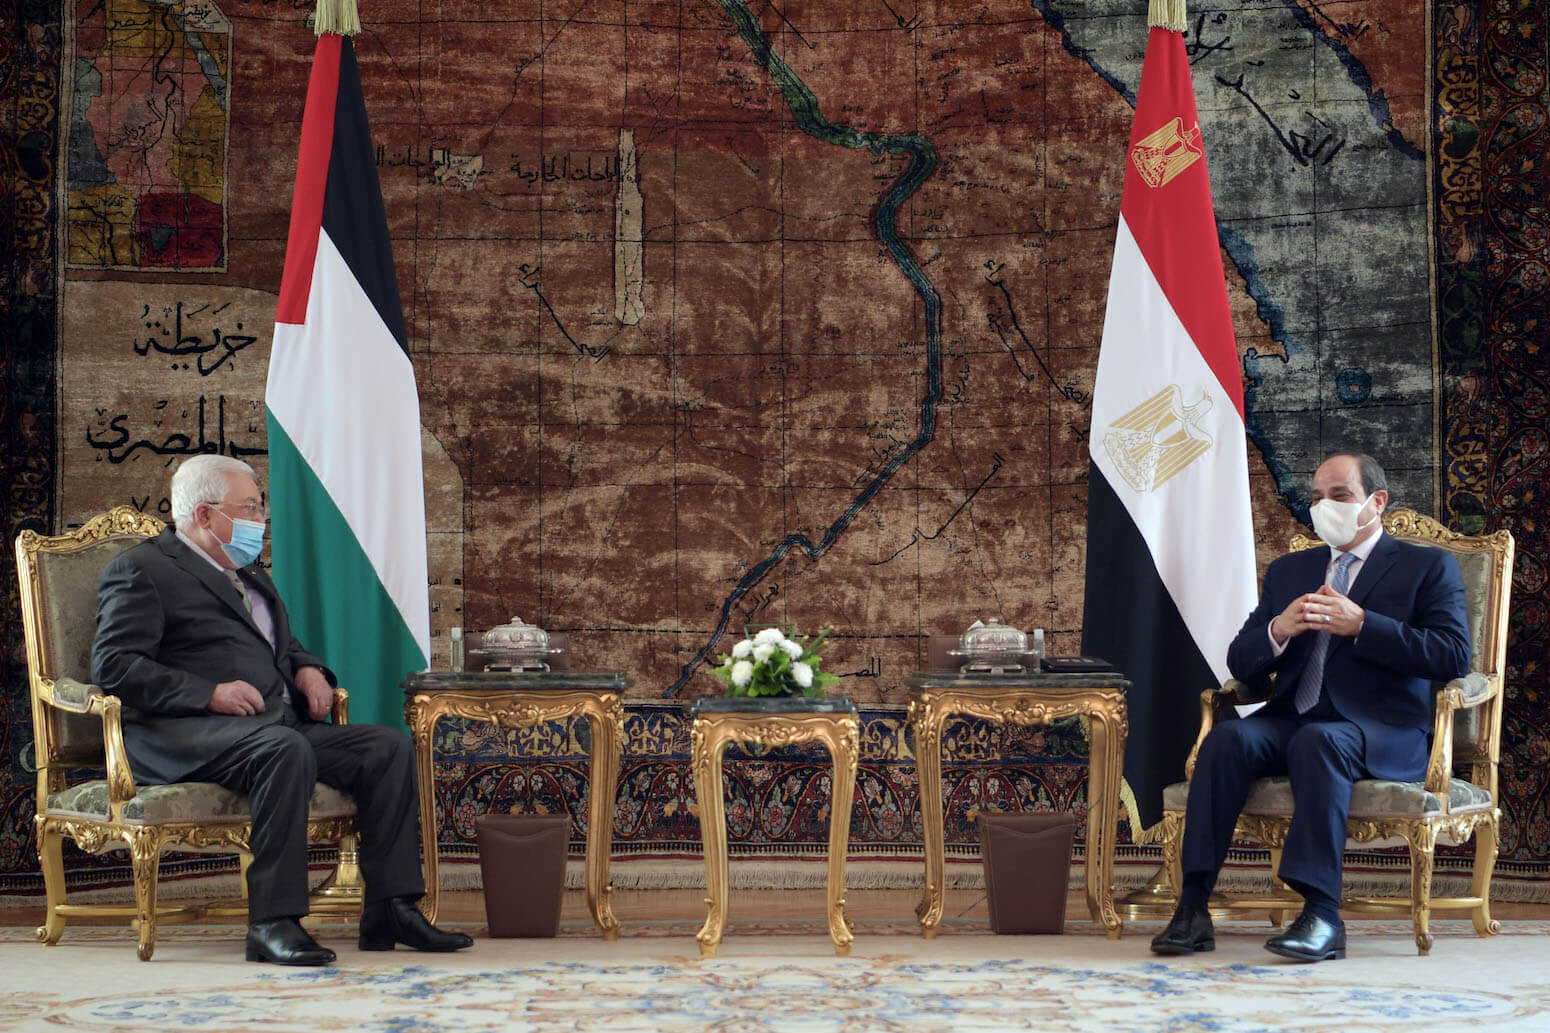 Egyptian President Sisi Reaffirms Full Support for Palestinian Cause